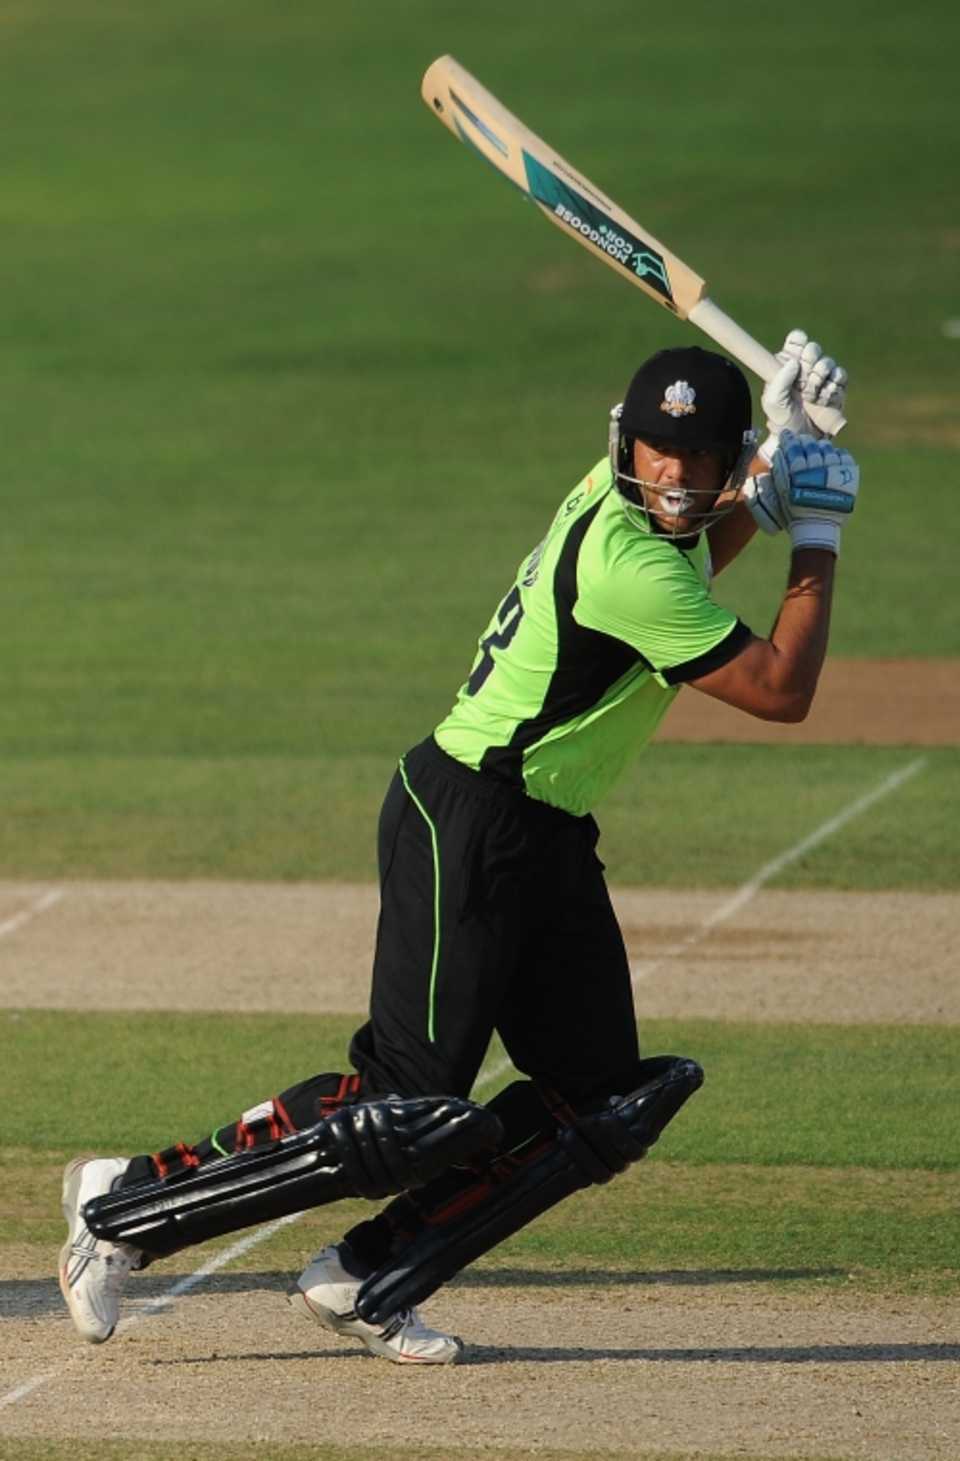 Andrew Symonds top-scored with 63 from 33 balls to set up an 11-run win for Surrey, Surrey v Hampshire, Friends Provident t20, South Group, The Oval